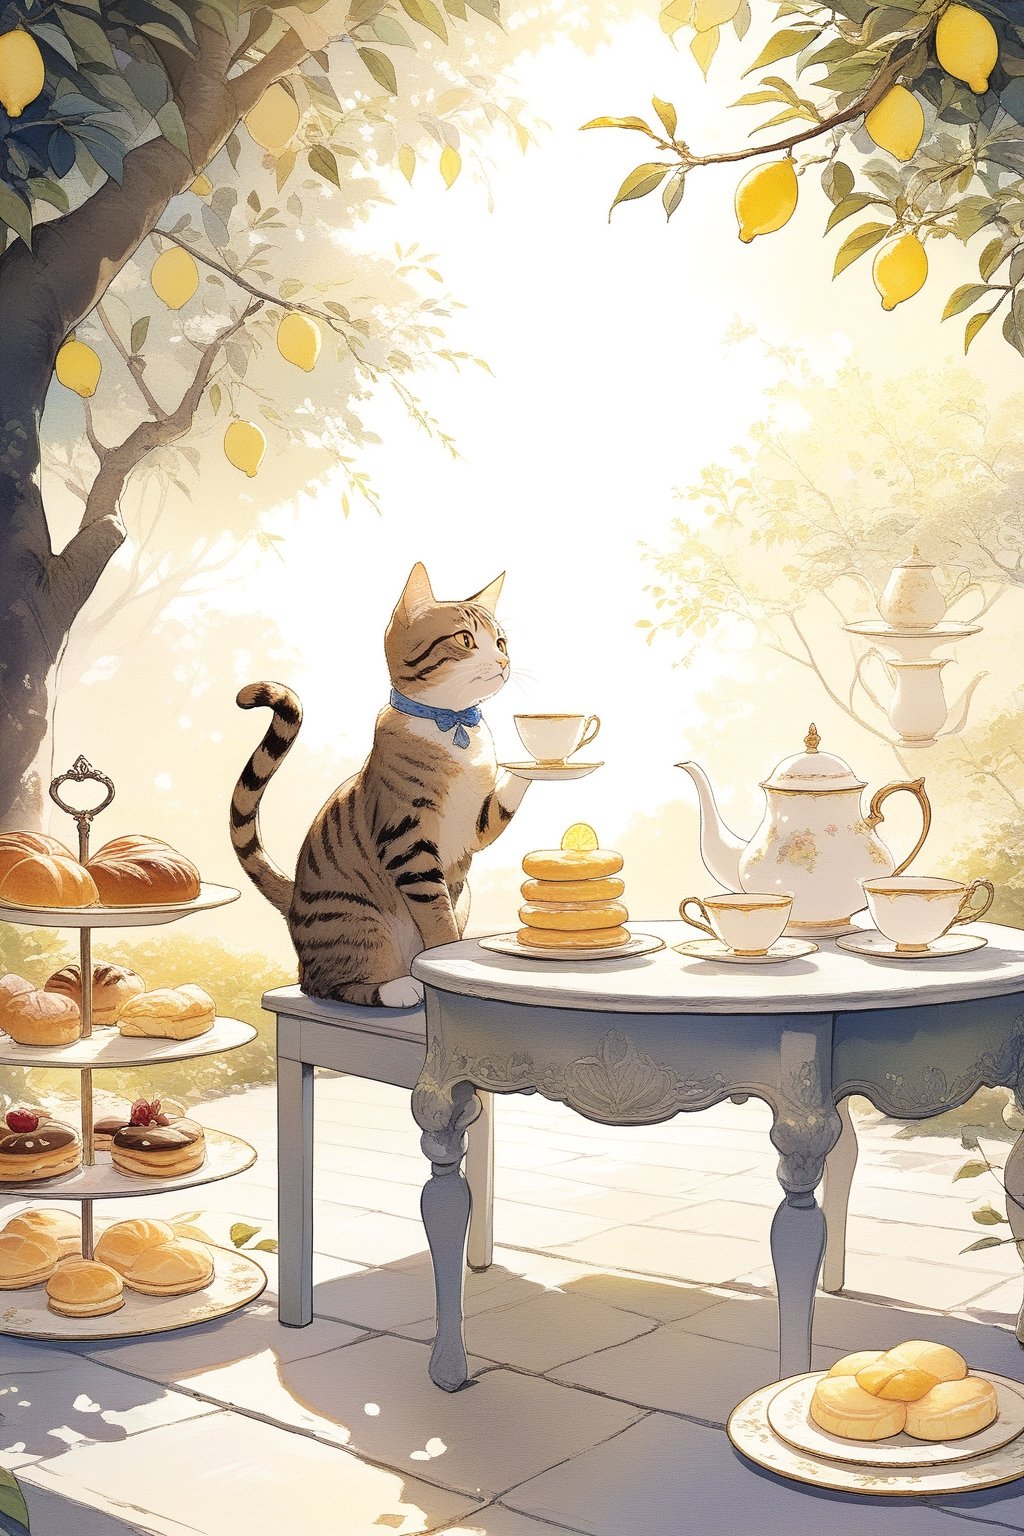 A cute tabby cat sitting upright at a small garden table set with china teacups and plates of pastries, in various seated poses around the table drinking tea and eating the treats, lemon trees surrounding the scene with sunlight dappling through the branches, whimsical wonderland atmosphere, soft dreamy lighting